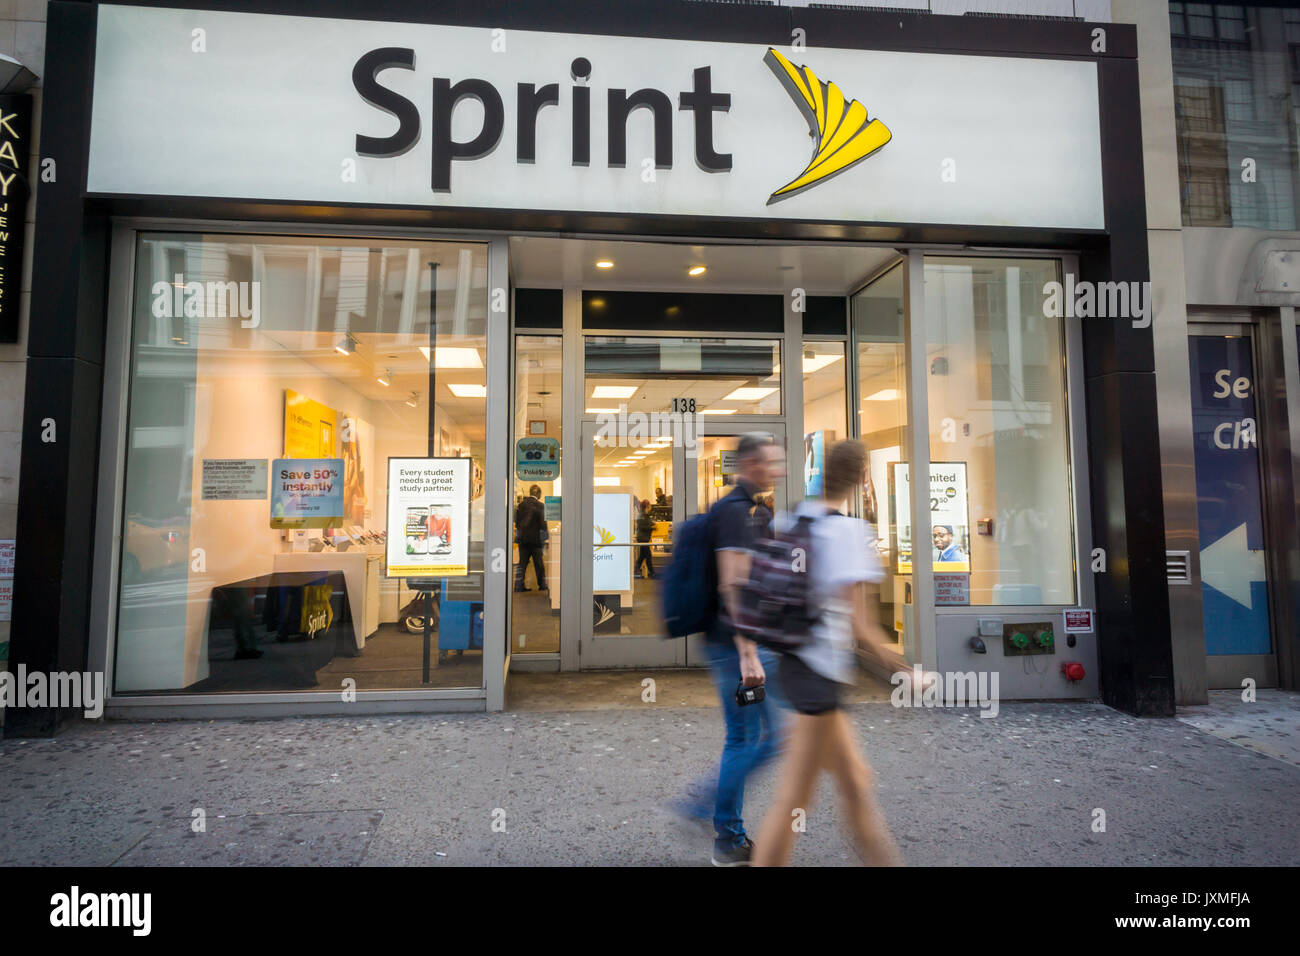 A Sprint store in the Herald Square neighborhood in New York on Tuesday, August 8, 2017. SoftBank, parent of Sprint,  is reported to be exploring  a takeover of Charter Communications, a cable provider. (© Richard B. Levine) Stock Photo